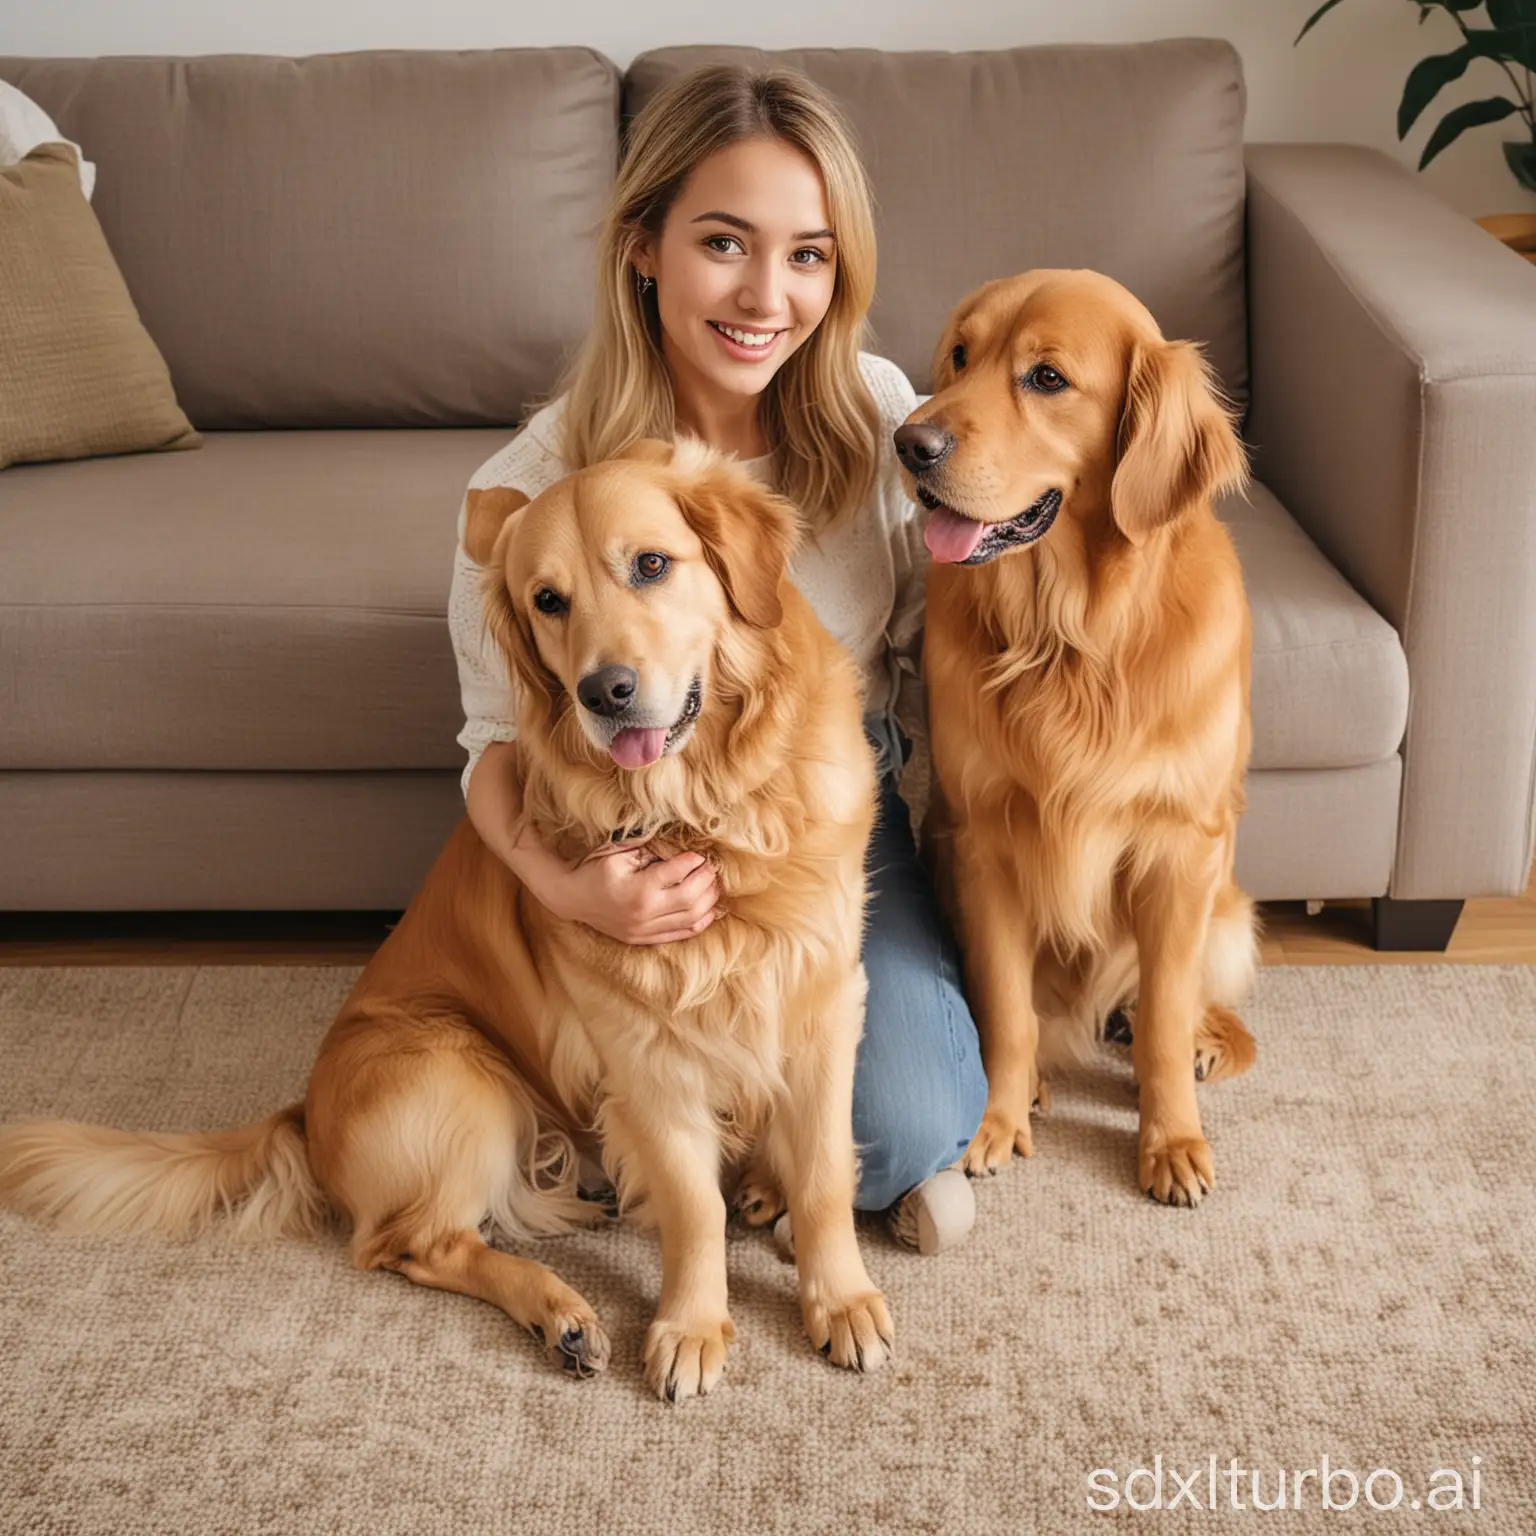 a beautiful foreign adult female holding a golden retriever sitting on the carpet in the living room